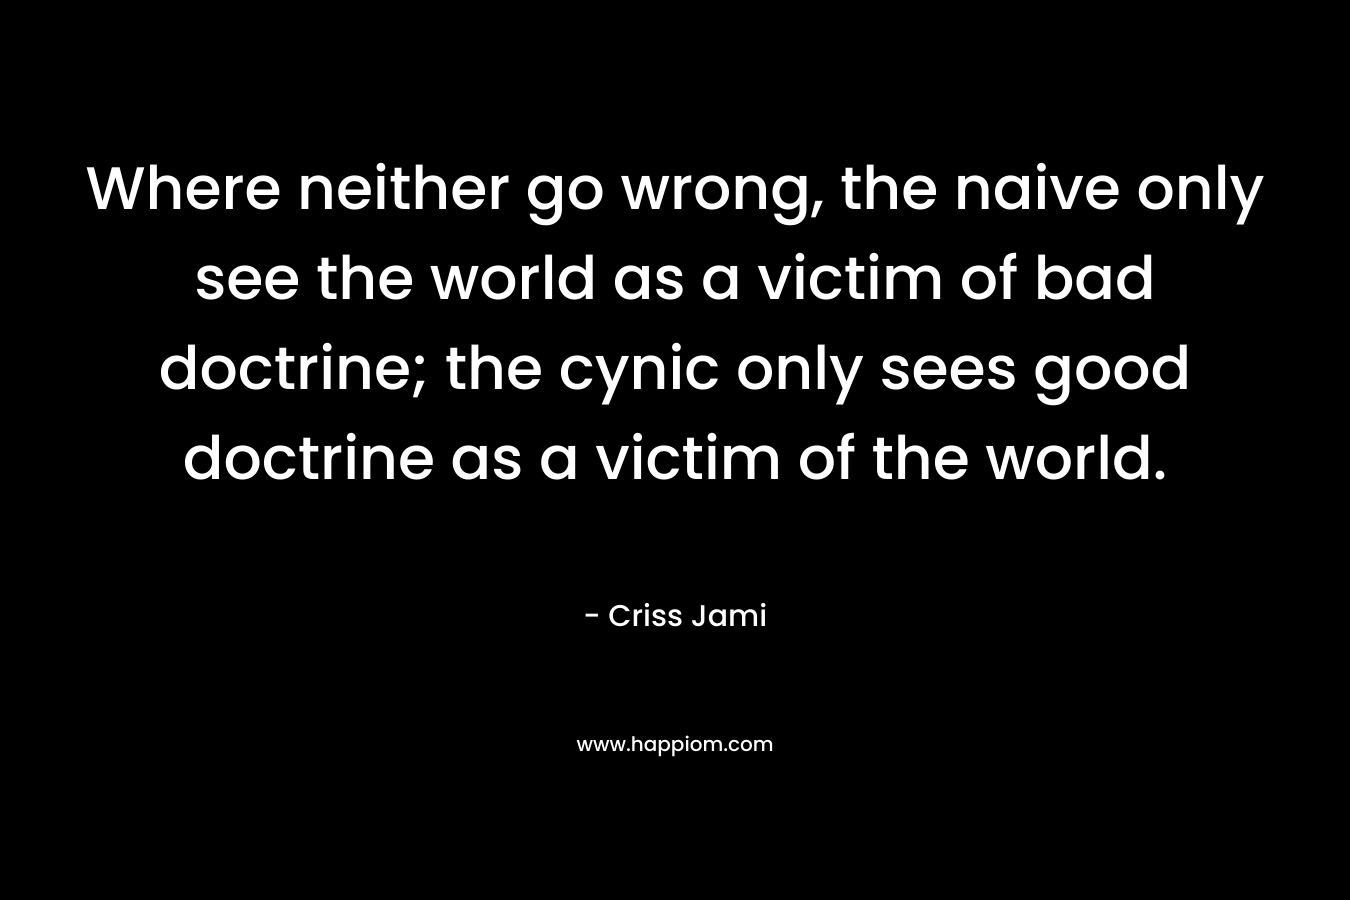 Where neither go wrong, the naive only see the world as a victim of bad doctrine; the cynic only sees good doctrine as a victim of the world. – Criss Jami